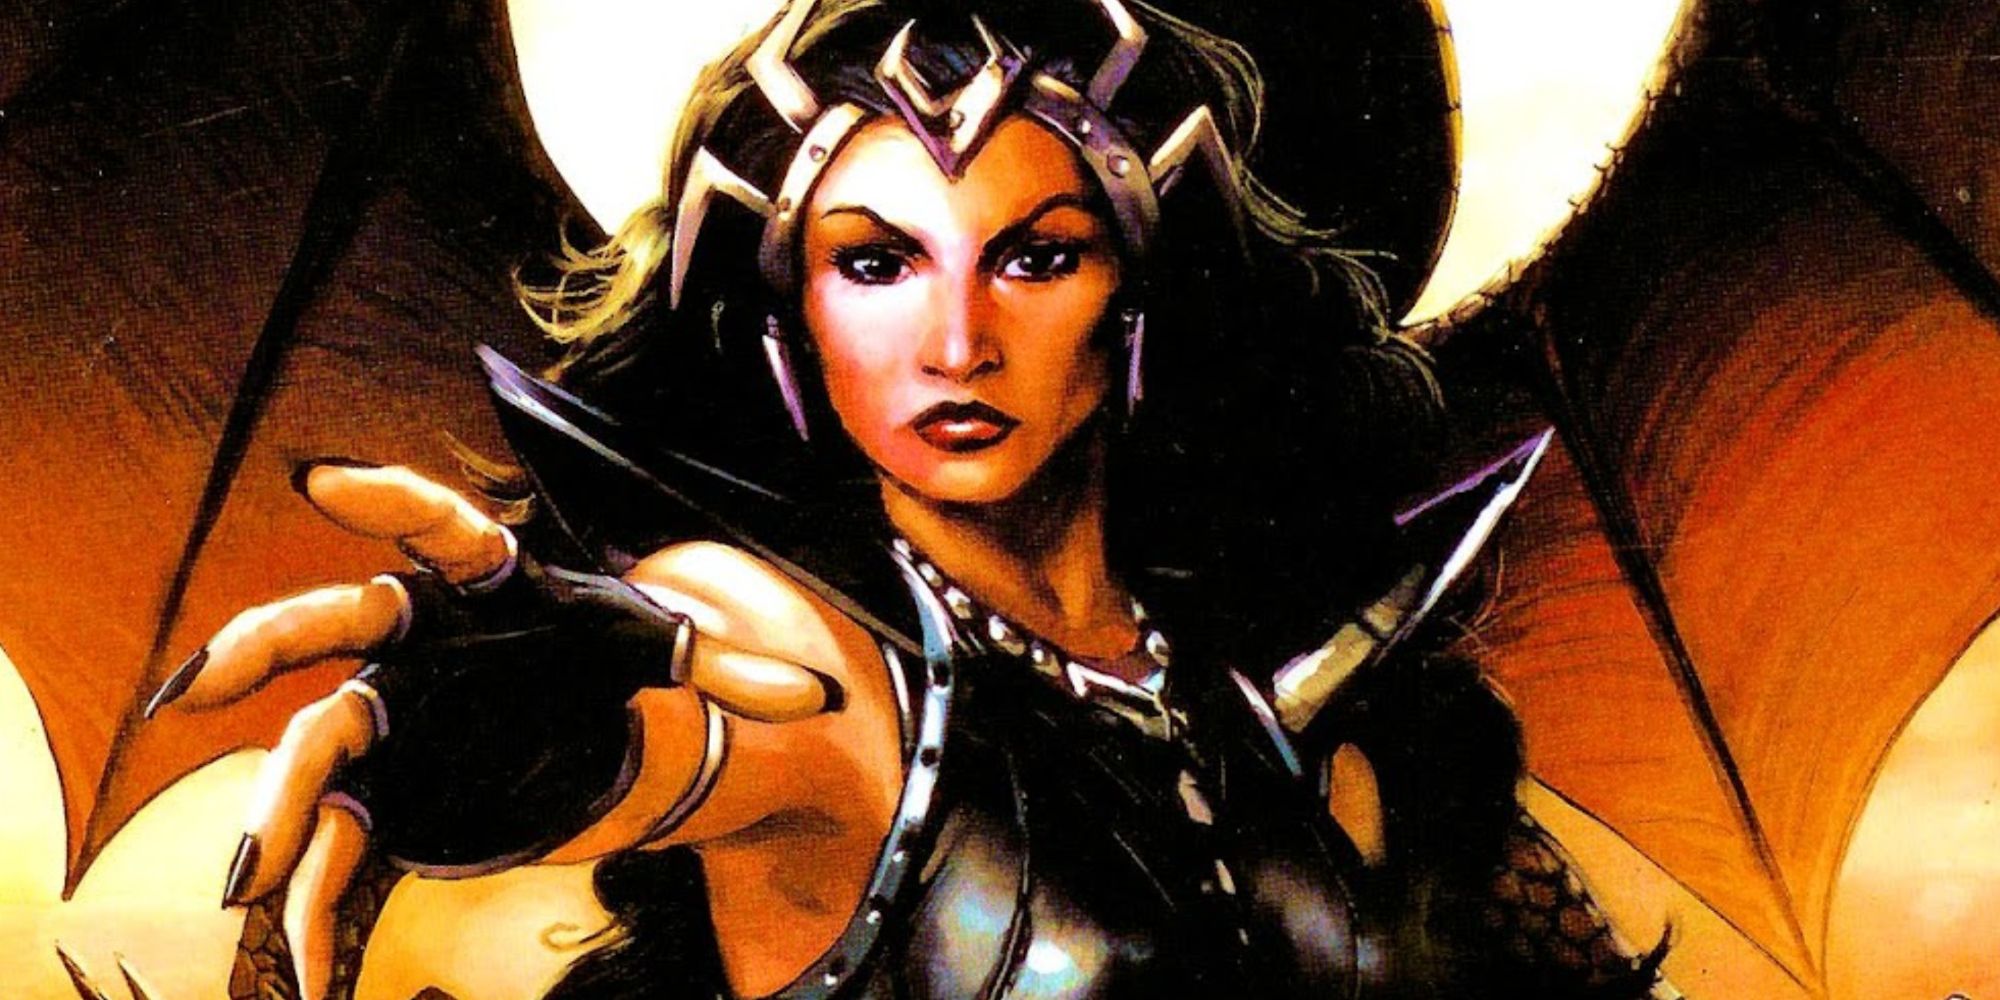 The human form of Takhisis, the goddess of evil dragons from D&D's Dragonlance